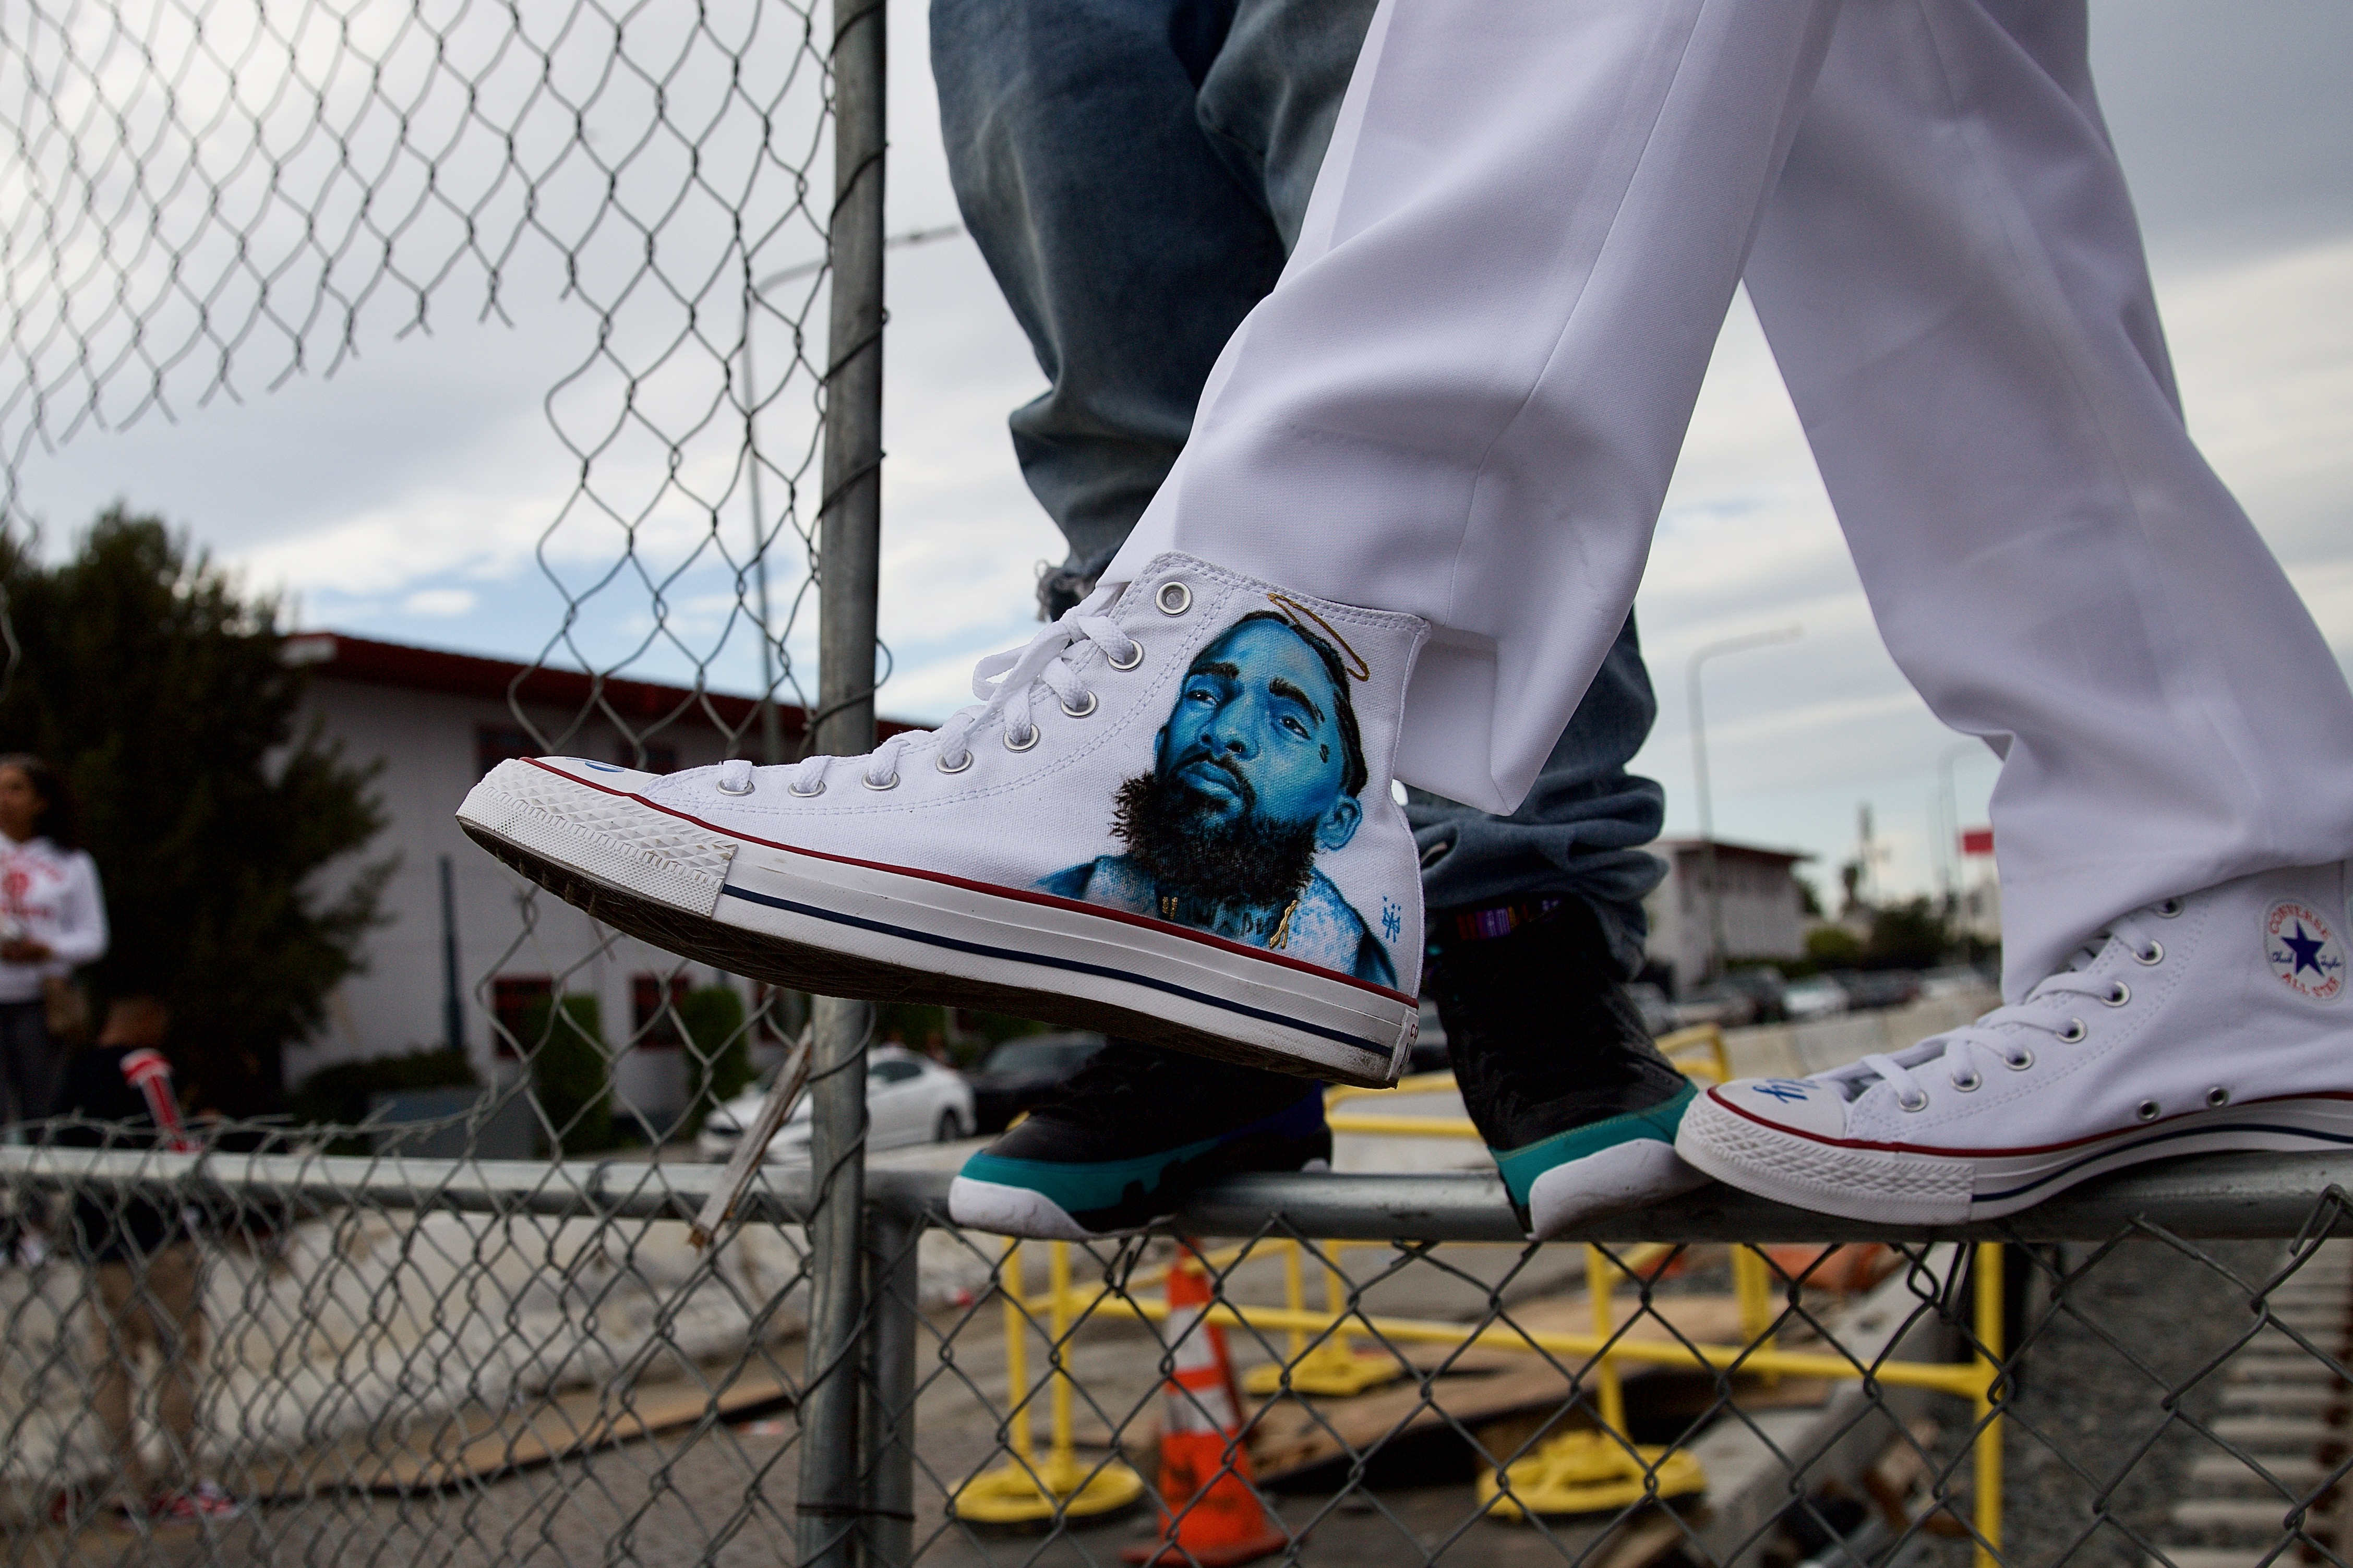 Jermaine Welch shows off the shoe he had custom painted in Nipsey Hussle's honor while waiting for Hussle's funeral procession to pass through the intersection at Crenshaw and Slauson on April 11. Hussle was killed in front of his store, The Marathon, on March 31. Sahra Sulaiman/Streetsblog L.A.